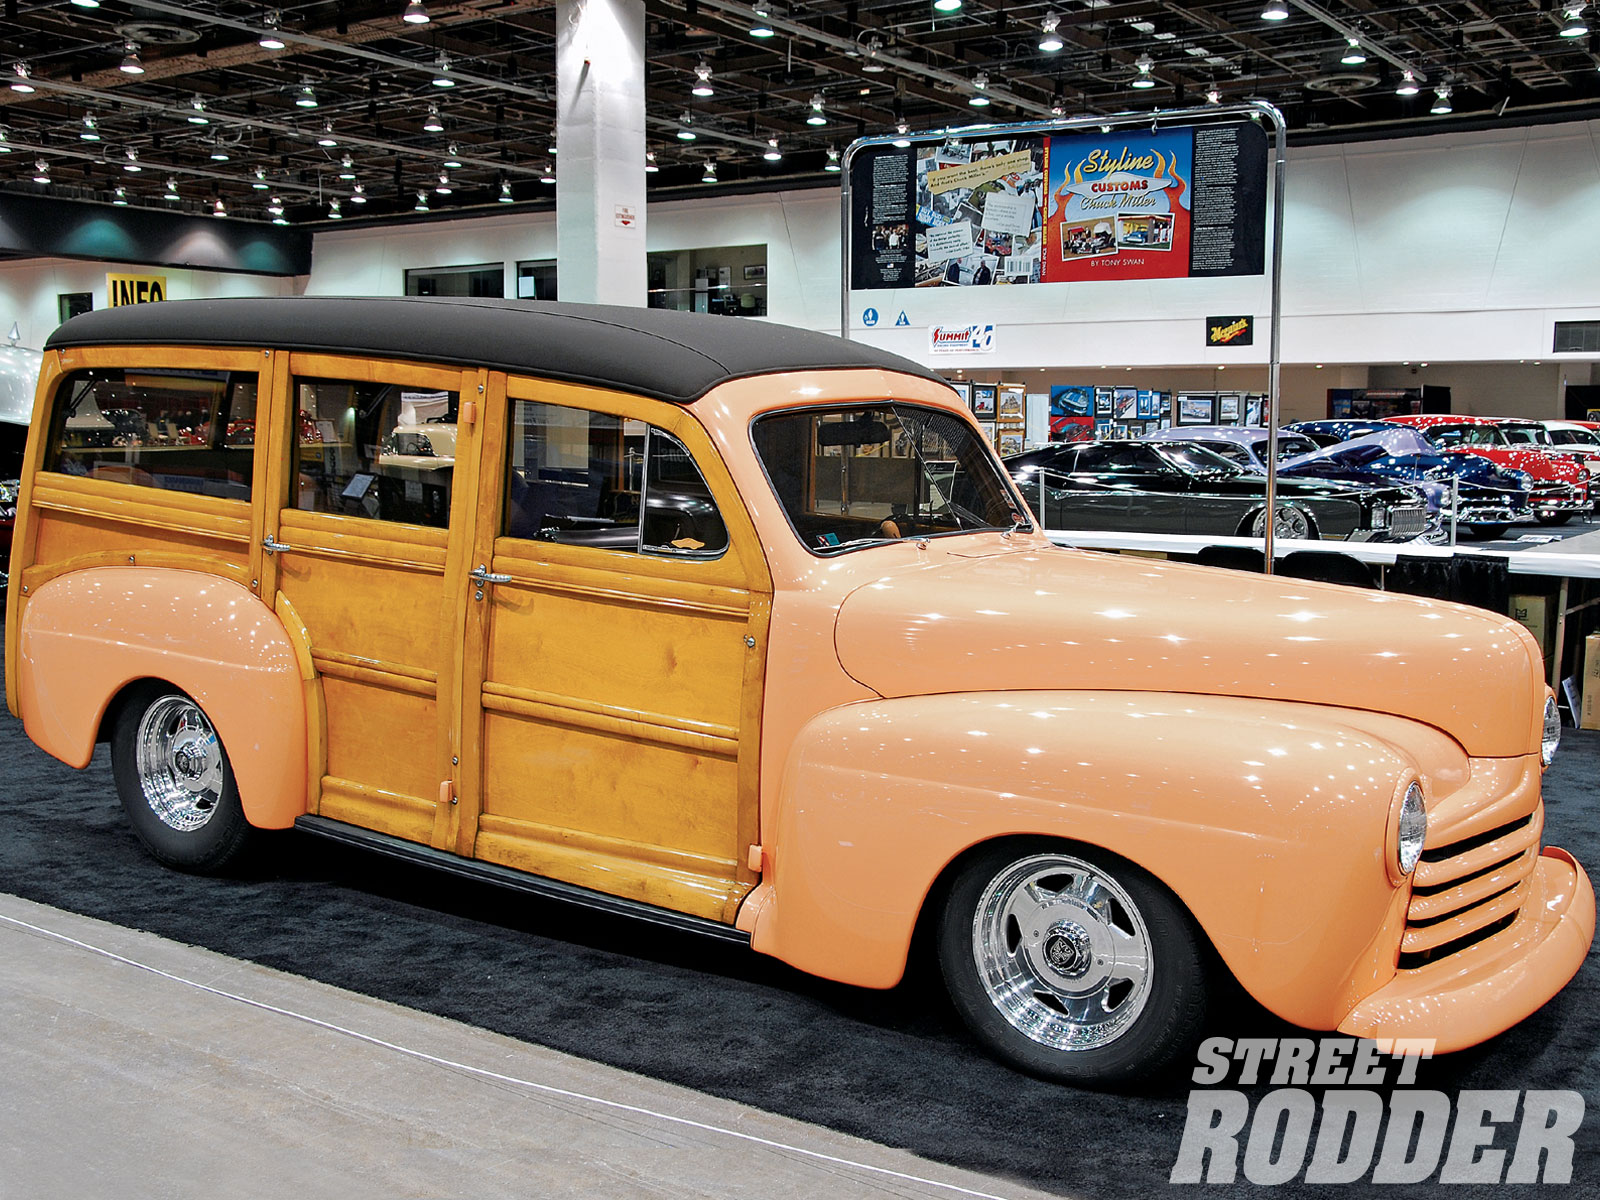 Ford Woodie wagon